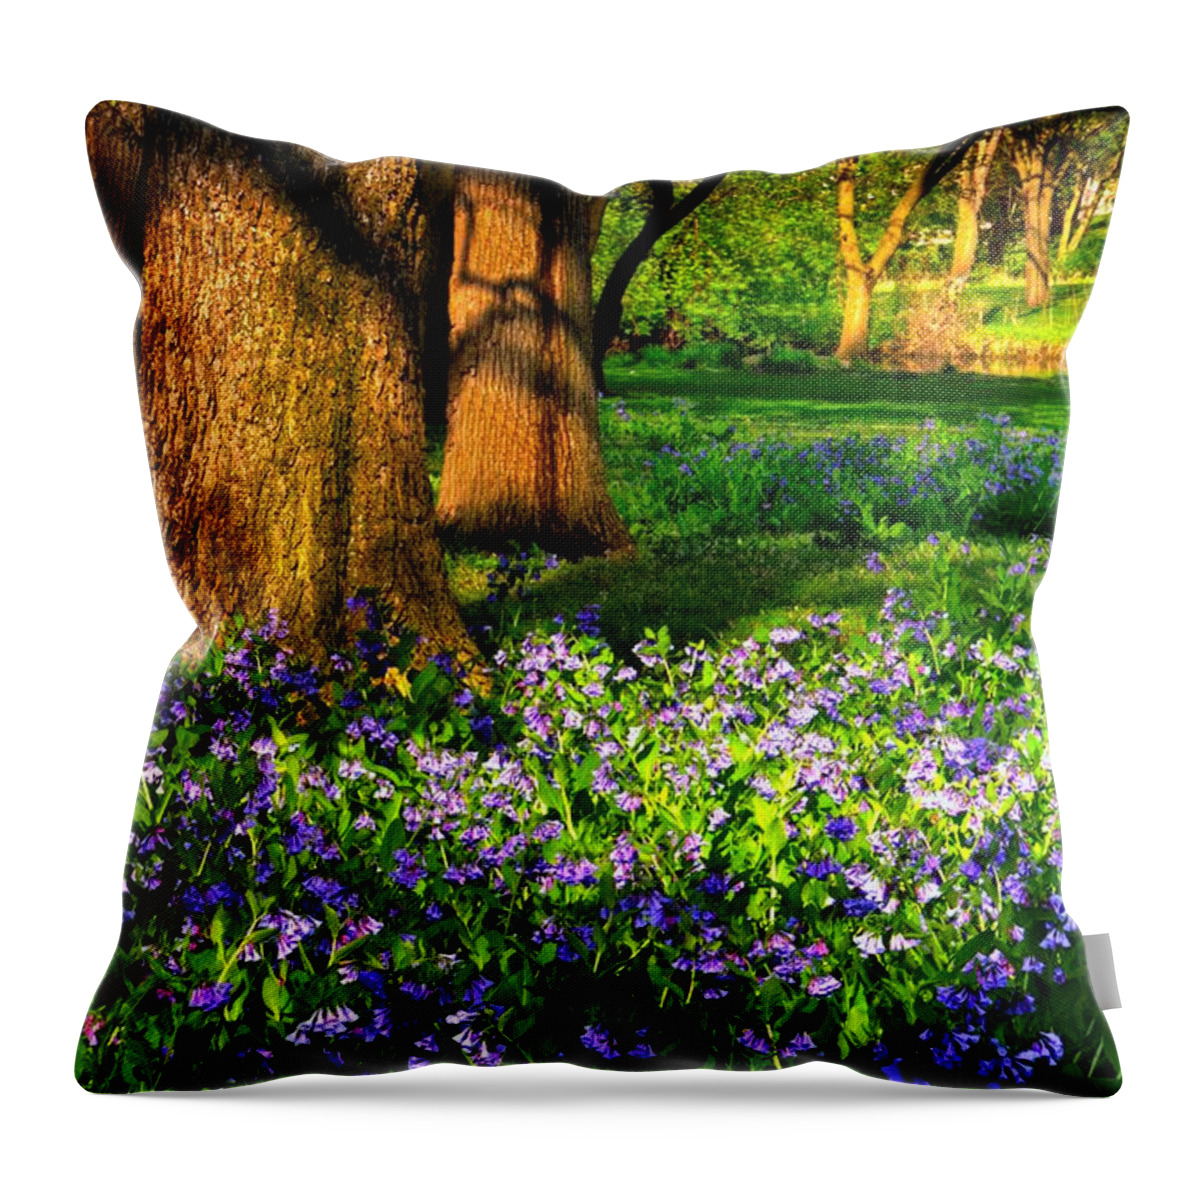 Flowers Throw Pillow featuring the photograph For Whom The Bells Toll by John Absher